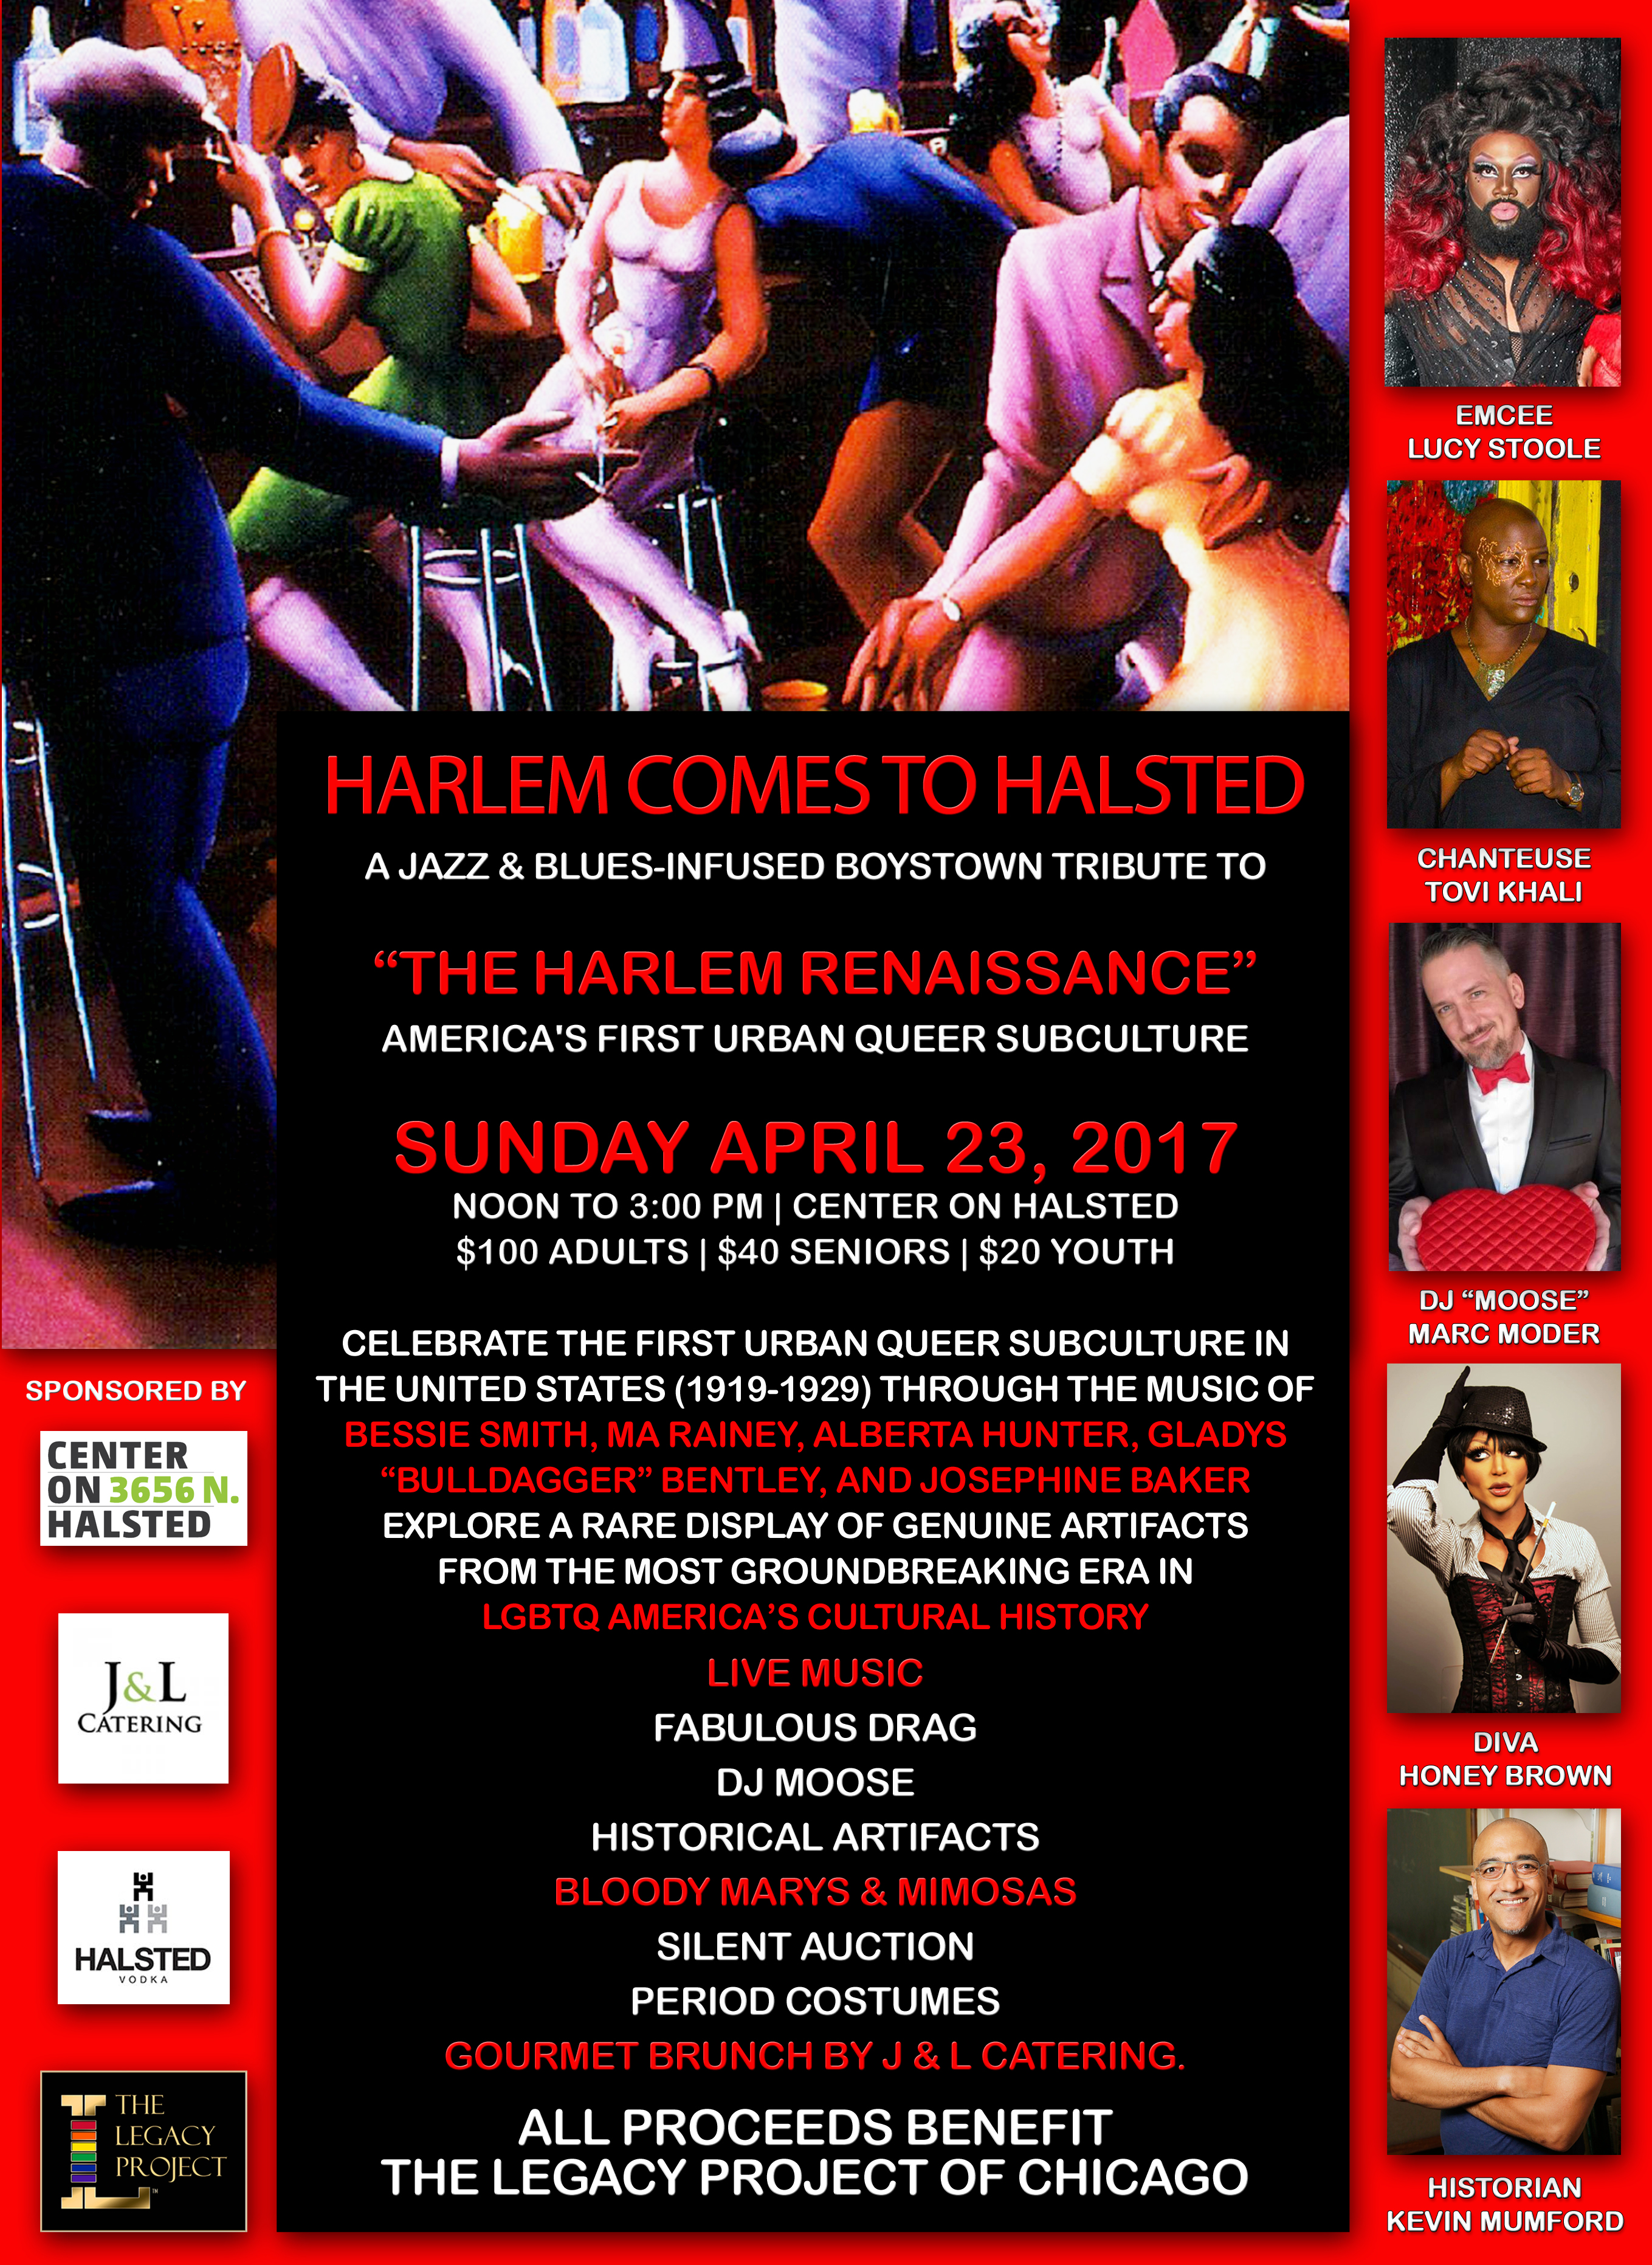 LEGACY PROJECT PRESENTS Harlem Comes to Halsted A Boystown Tribute to The Harlem Renaissance 2017